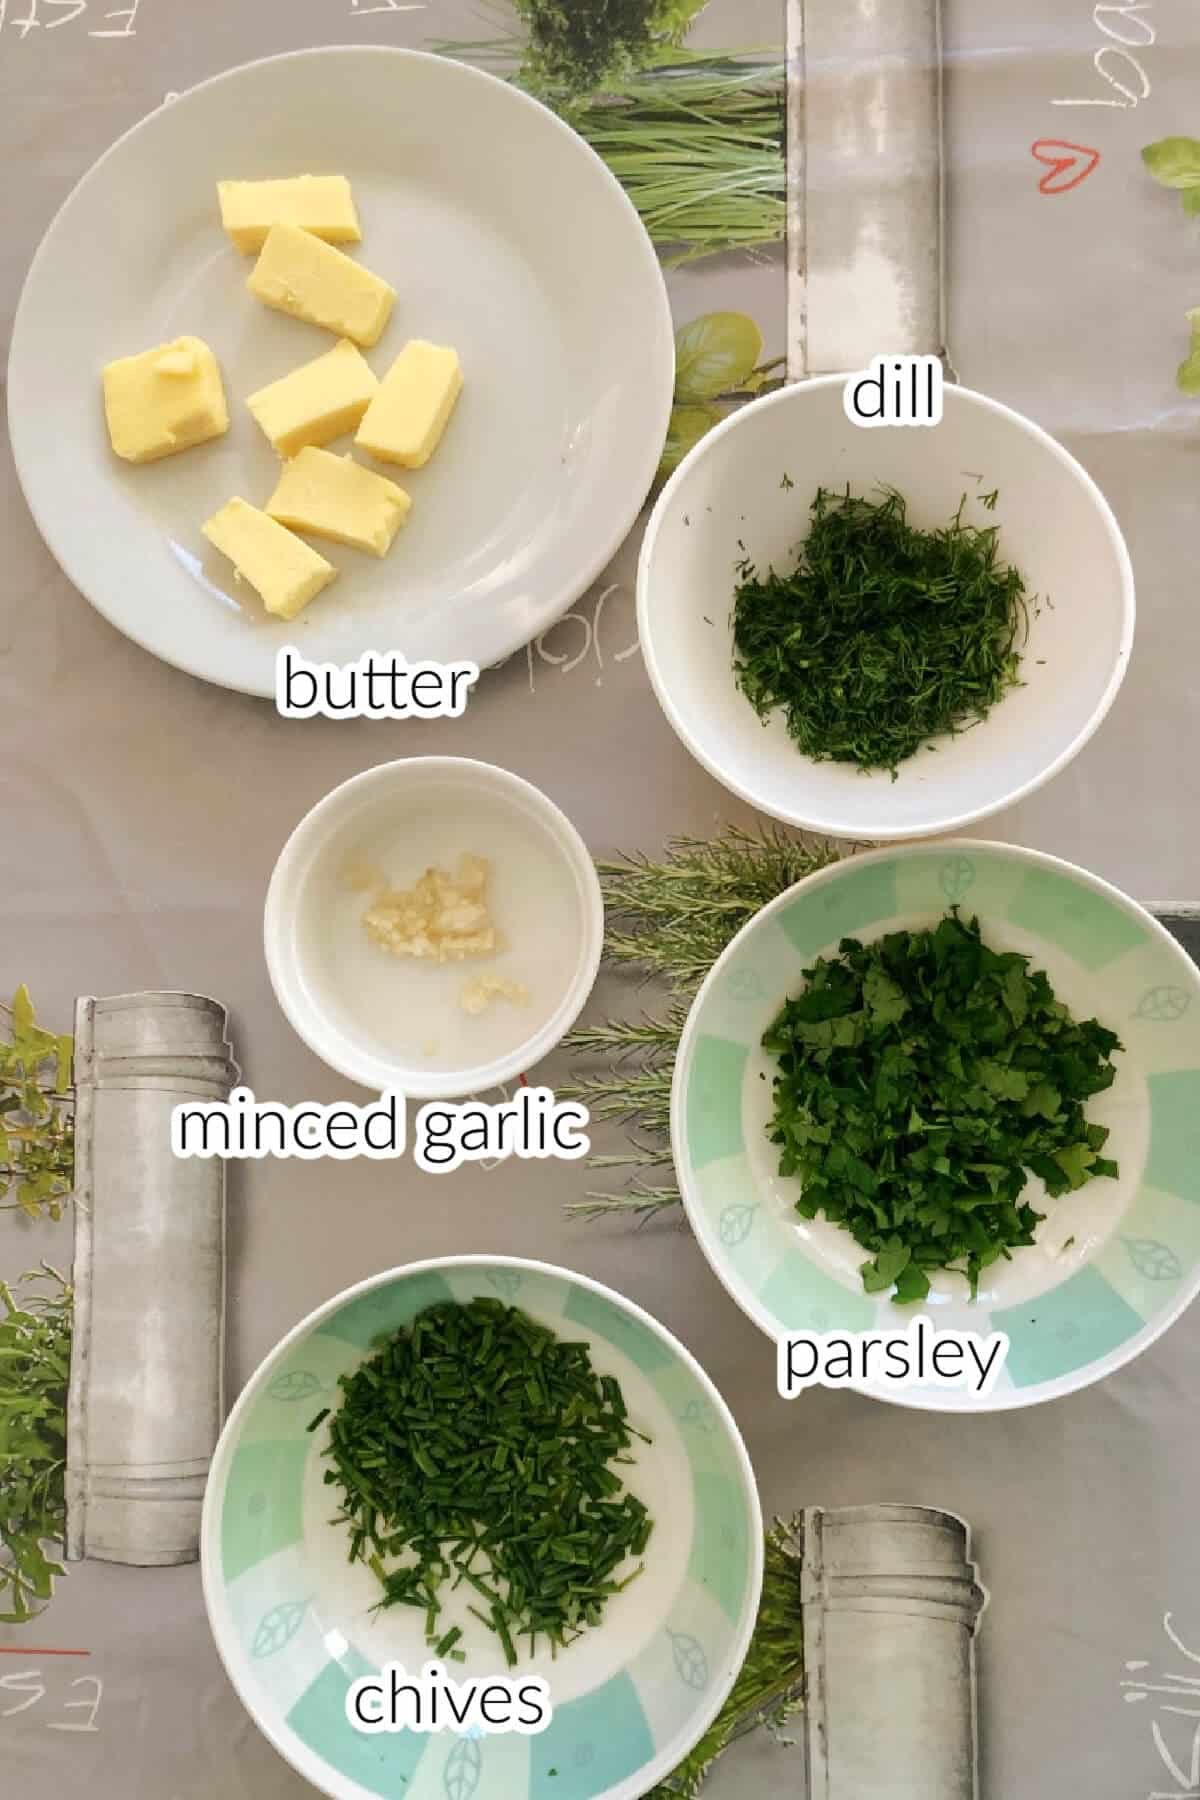 Ingredients needed to make garlic and herb butter.